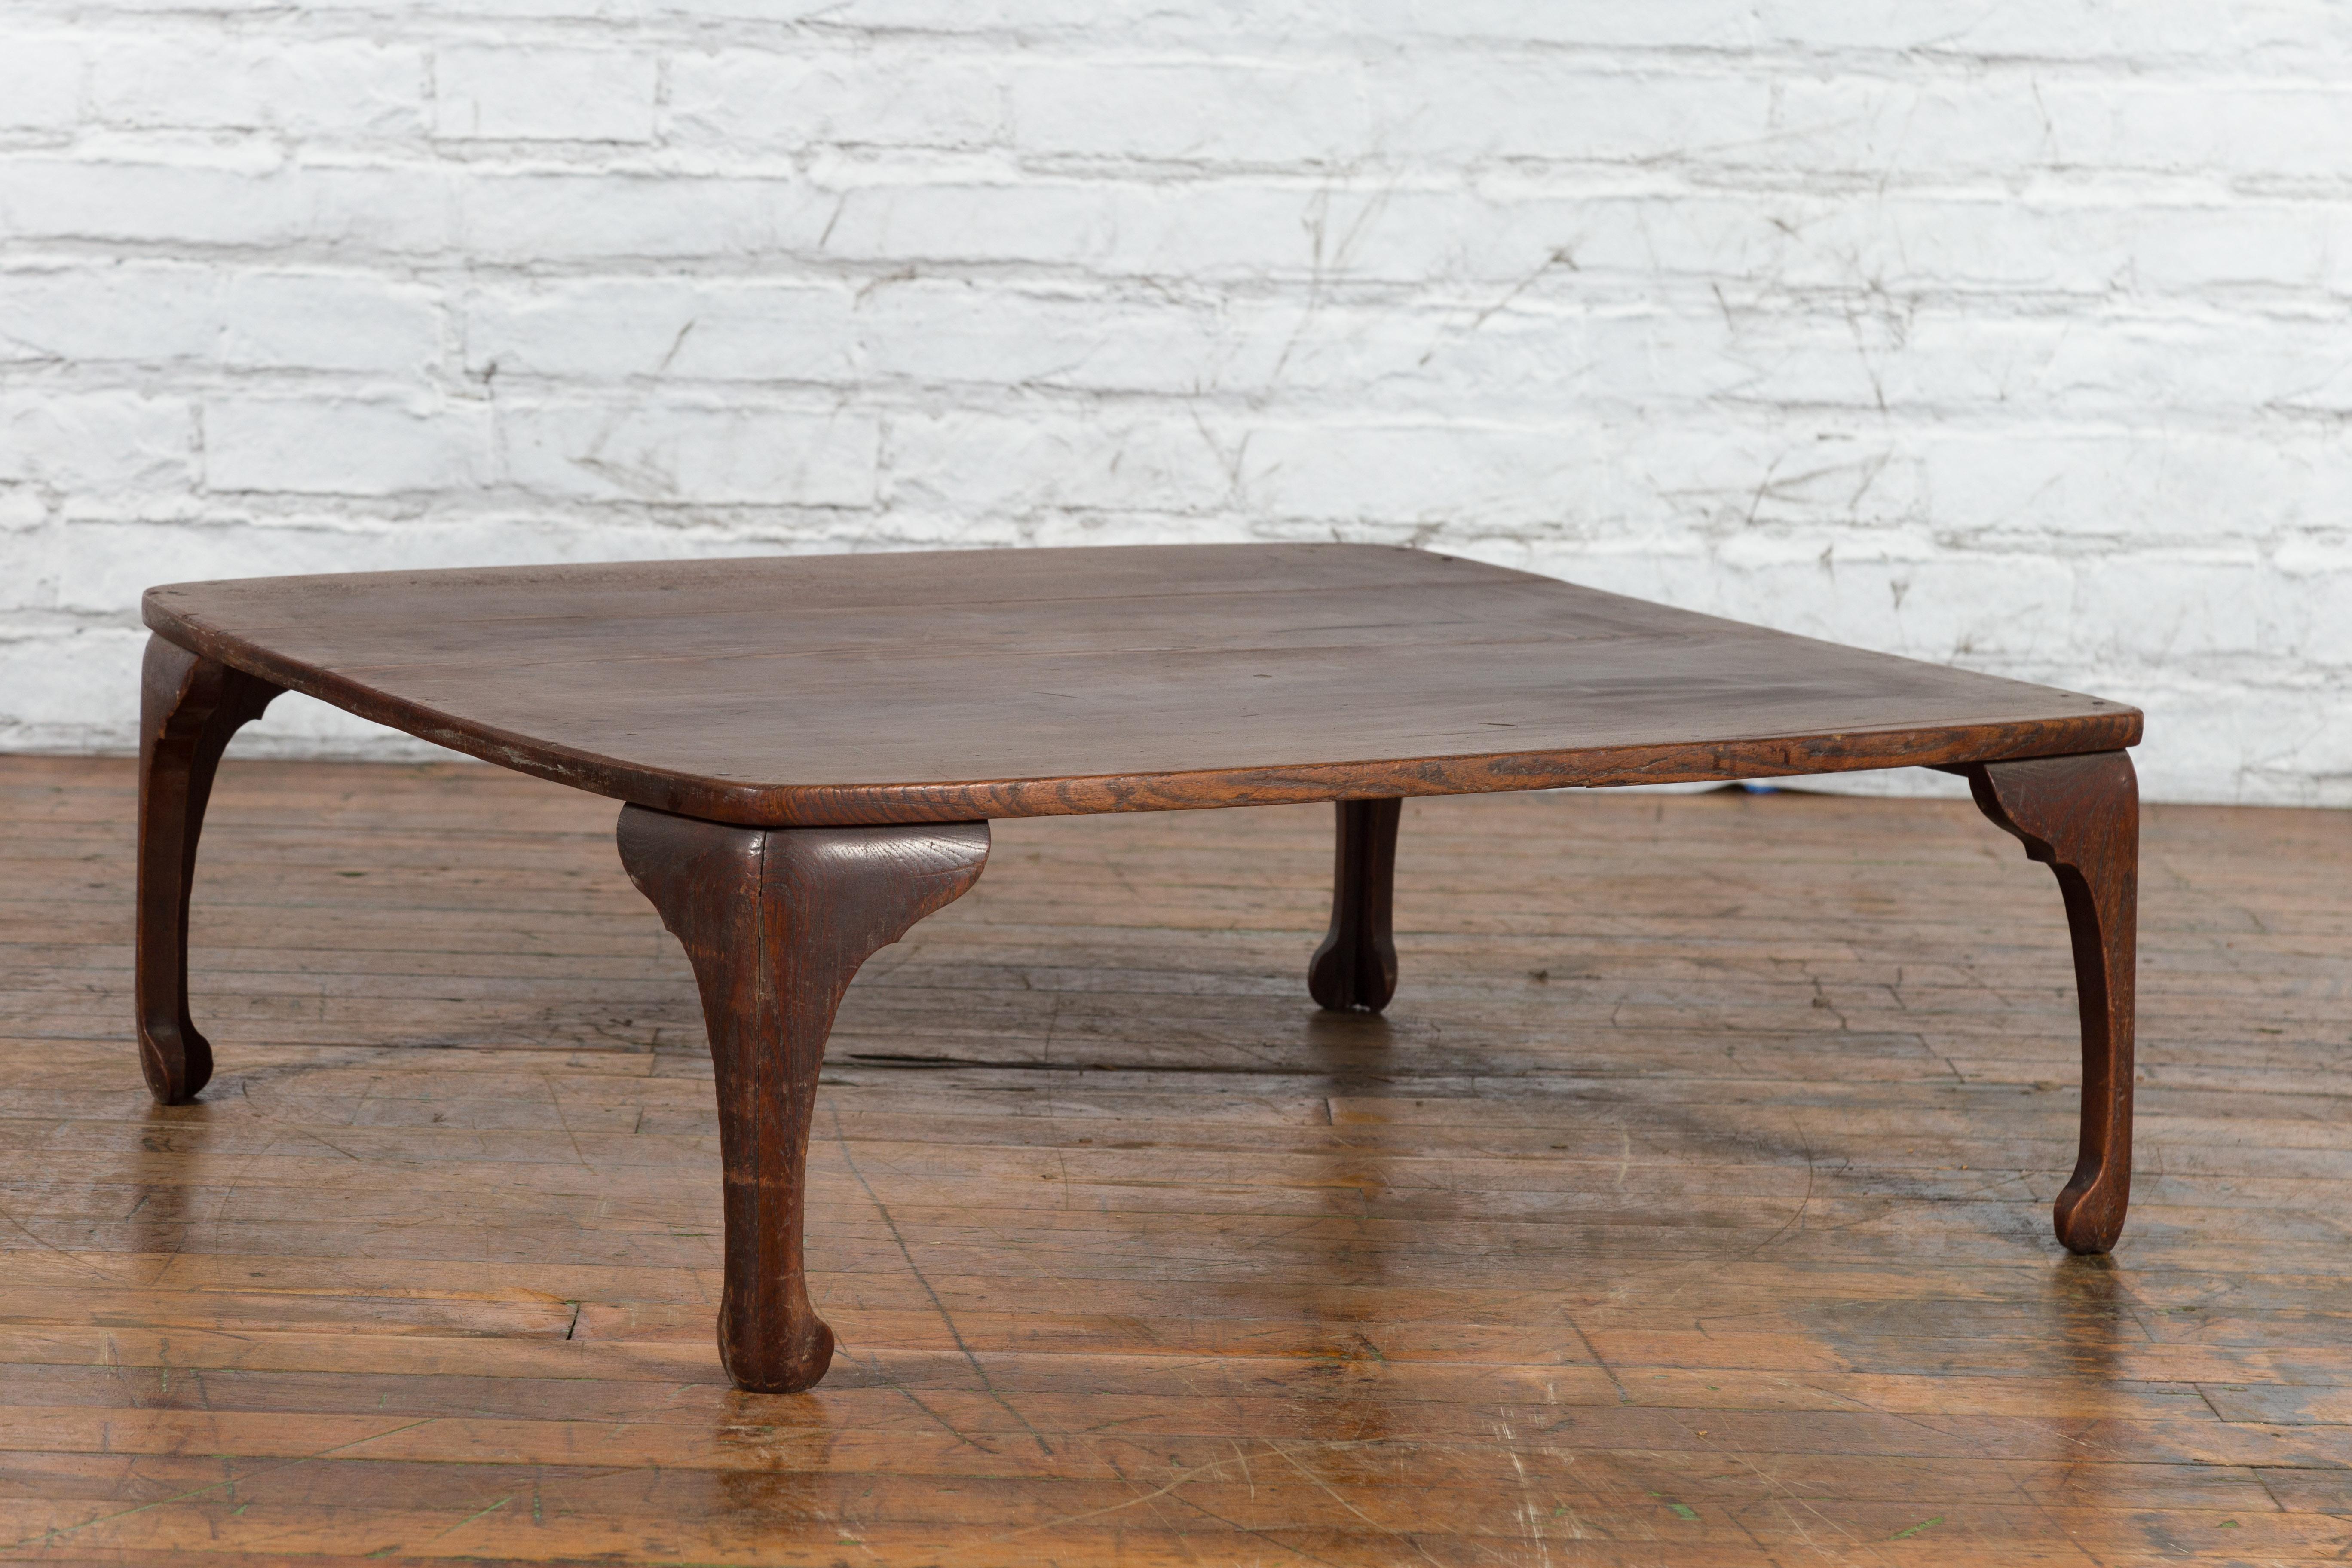 Chinese Early 20th Century Low Wooden Table with Curving Legs For Sale 5